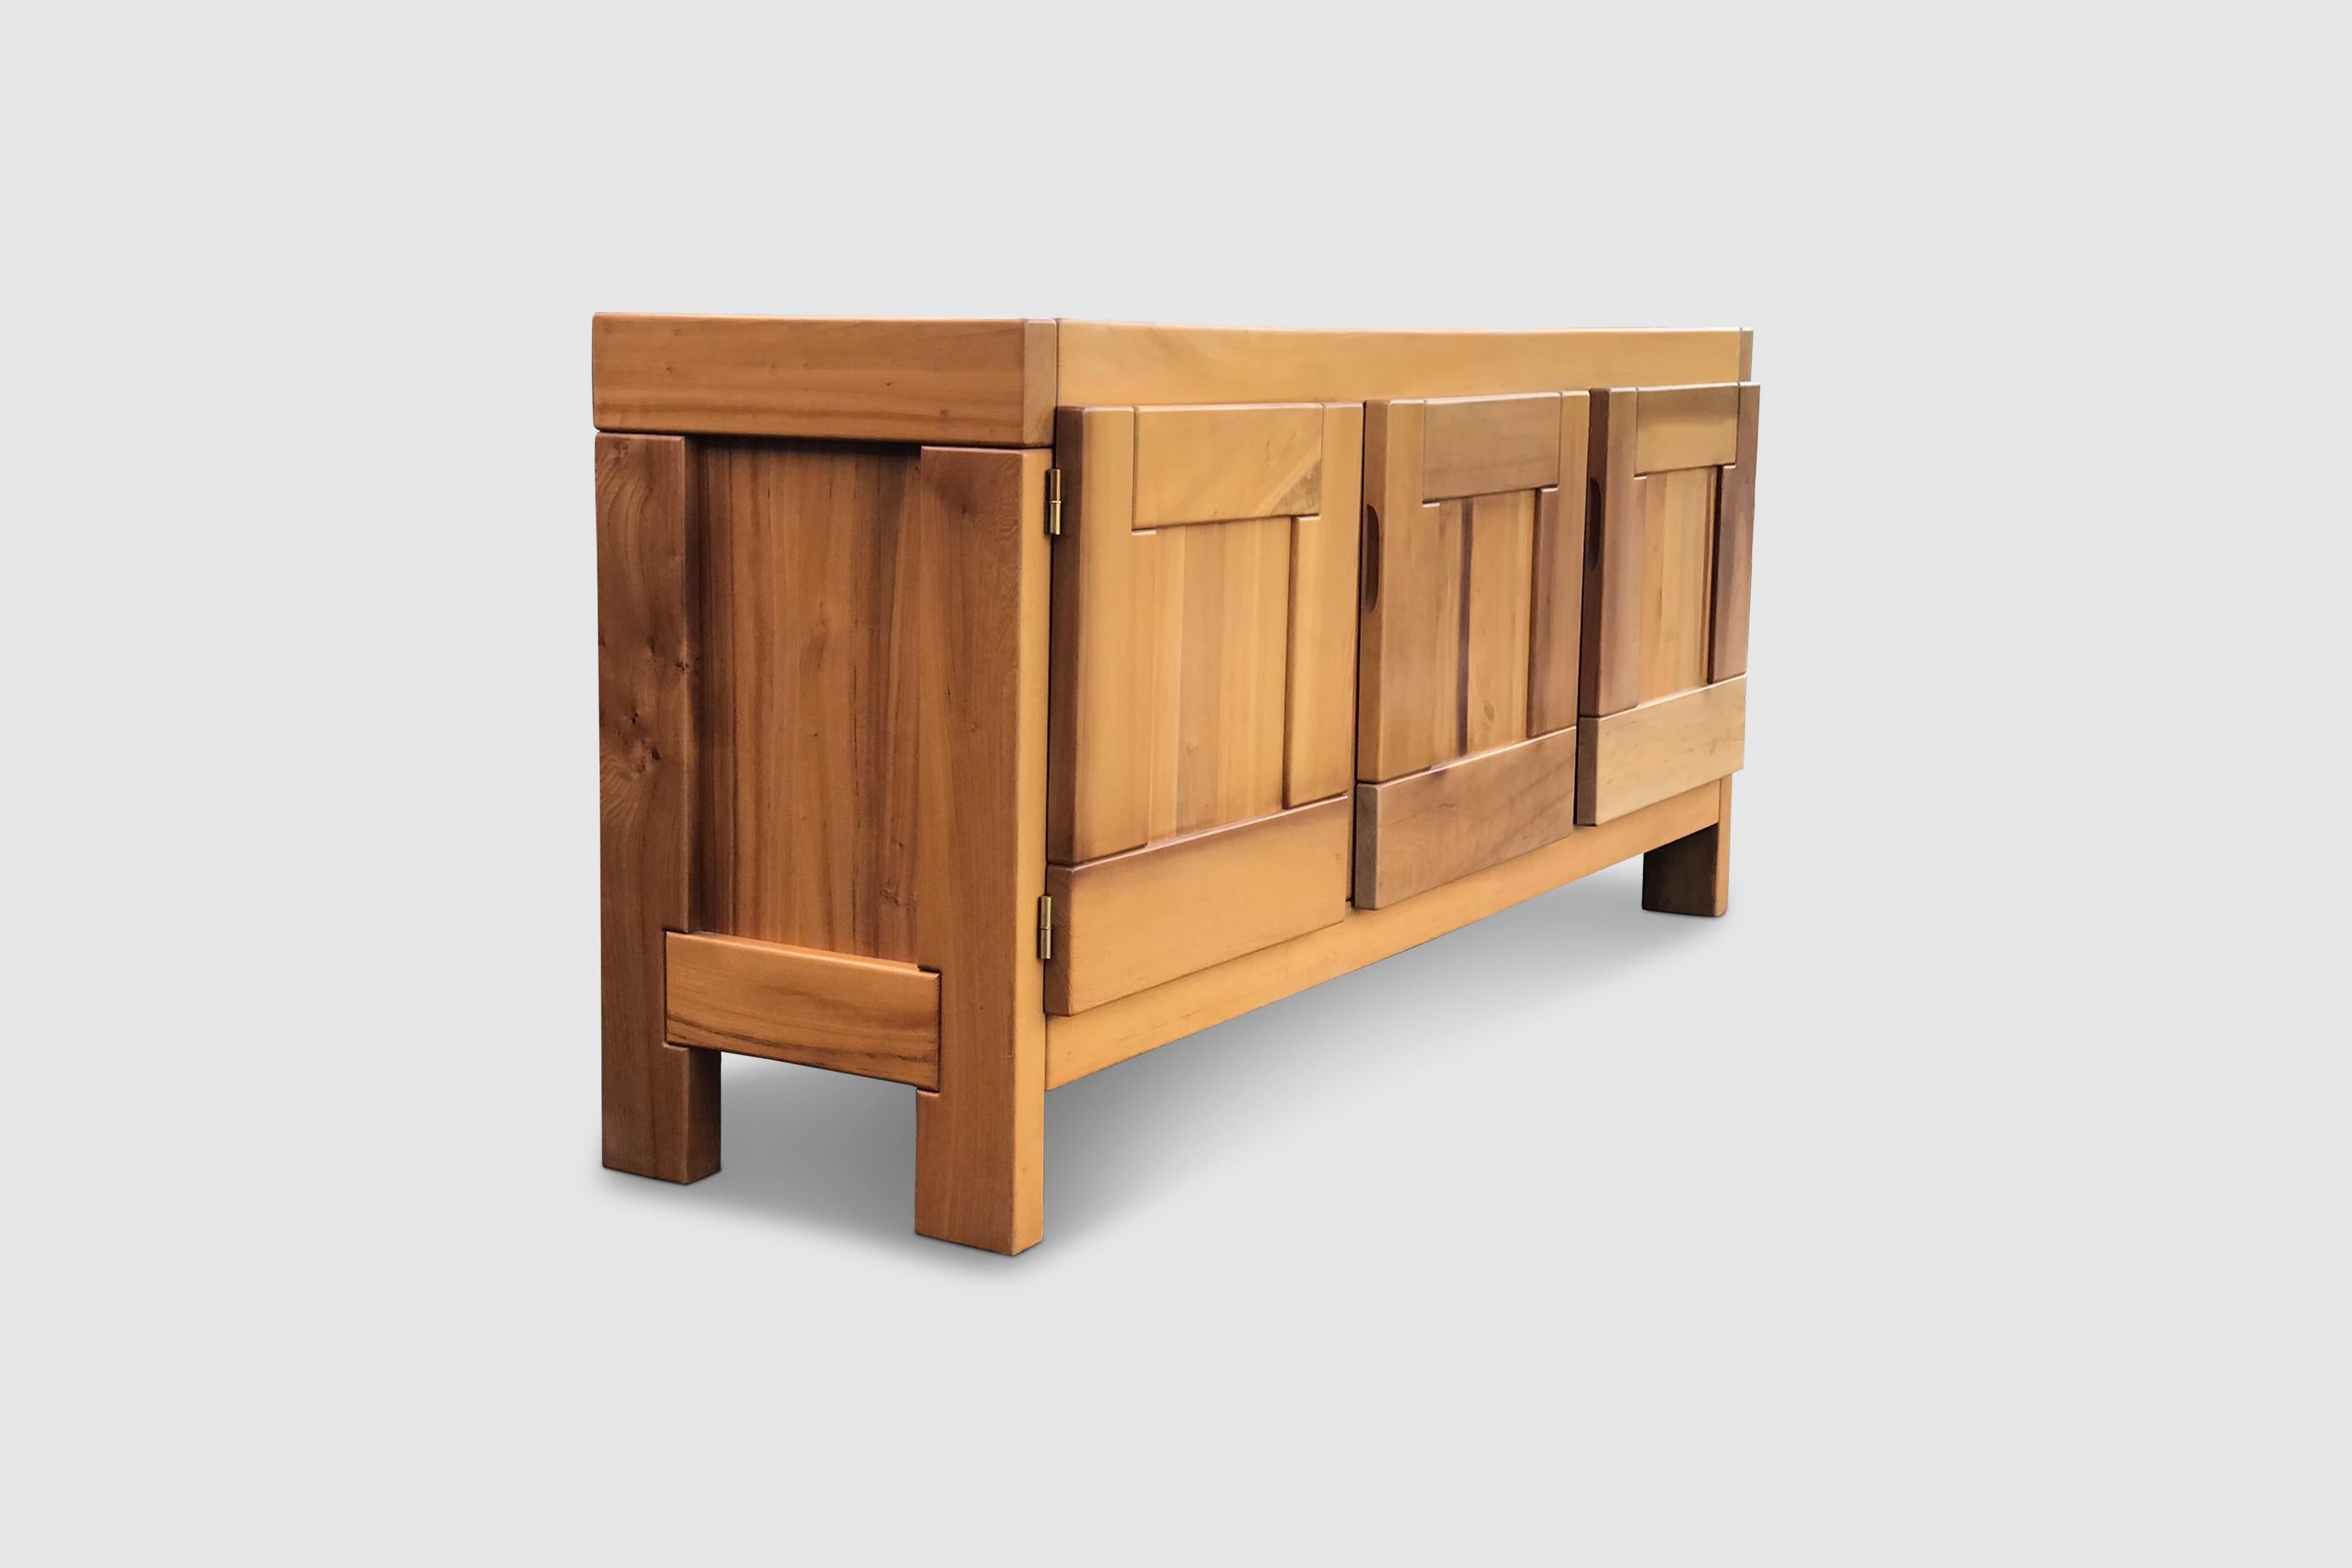 This sideboard is yet another great example of French modernist design. The sideboard is built out of solid elm.

The sideboard features 3 hinged drawers, accessing 5 compartment and 1 compartment with 2 sliding drawers.

Notice the beautifully